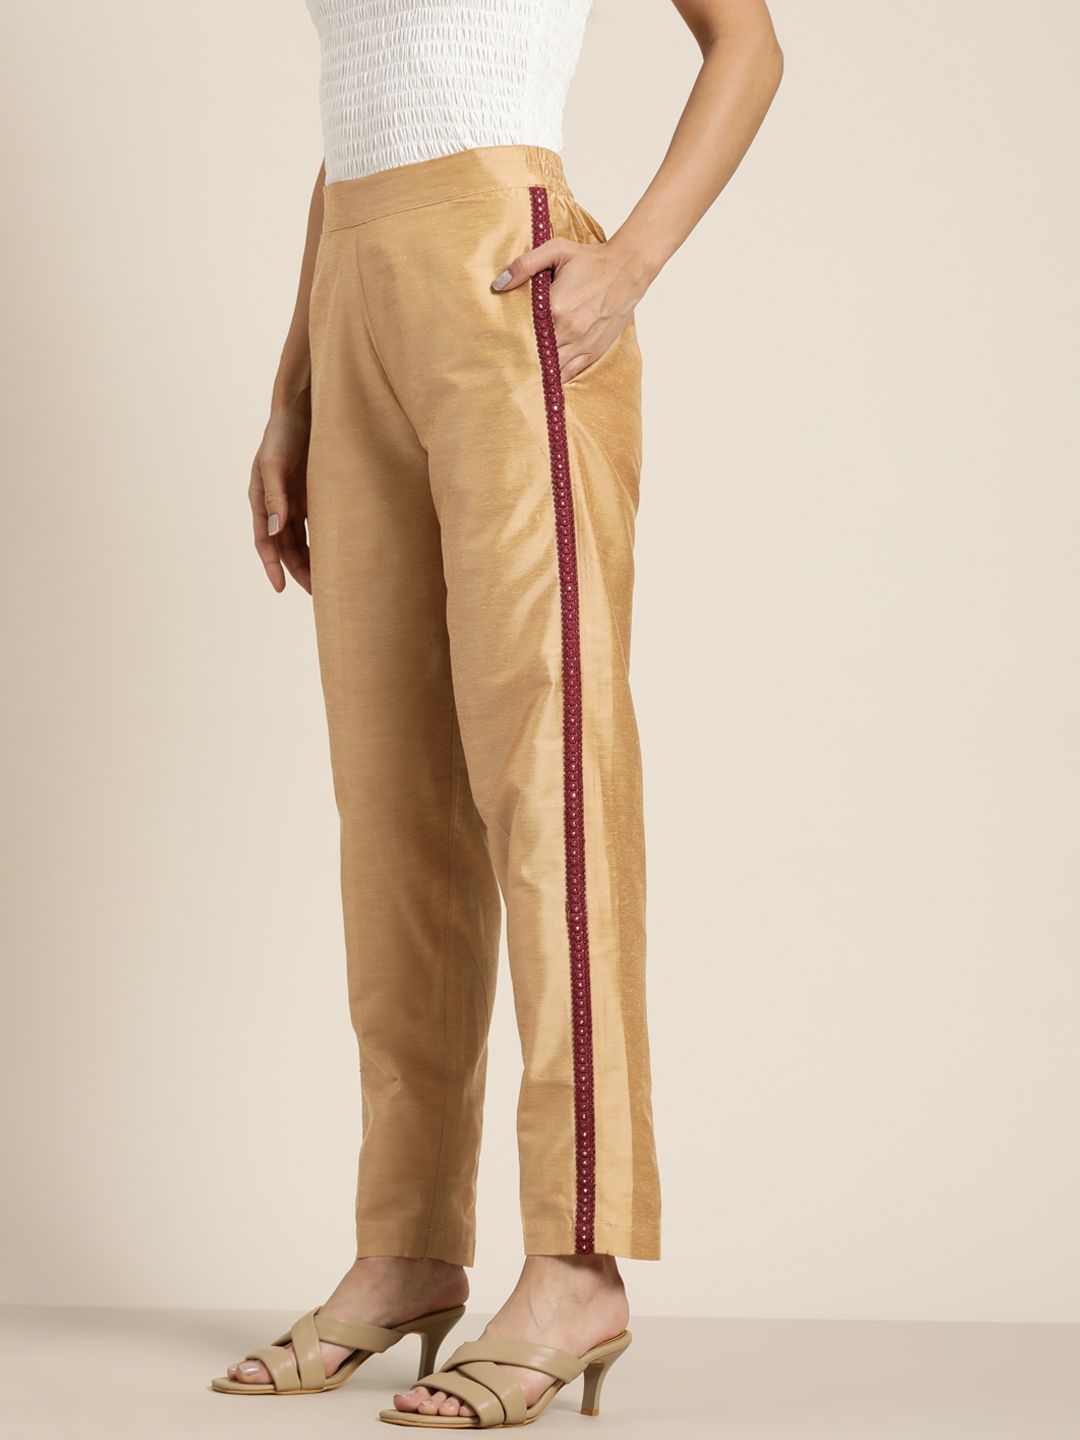 Shae by SASSAFRAS Women Gold-Toned  Mirror Lace Pencil Pants Price in India